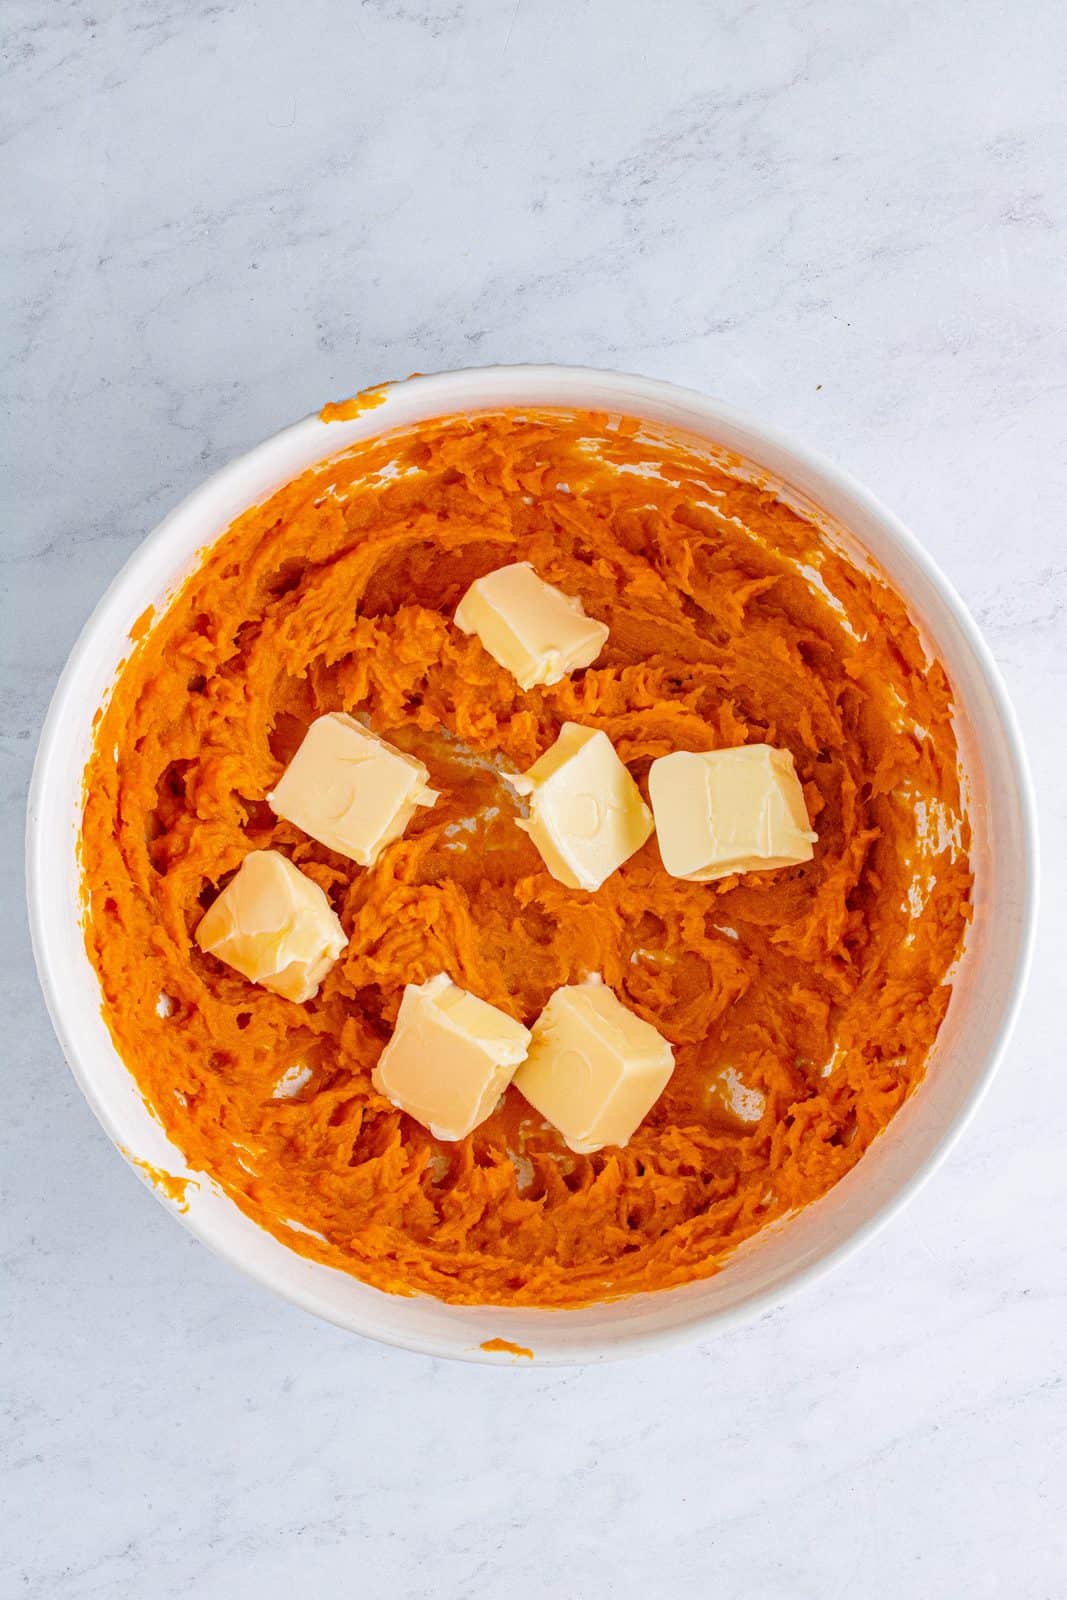 Butter added to blended sweet potatoes.